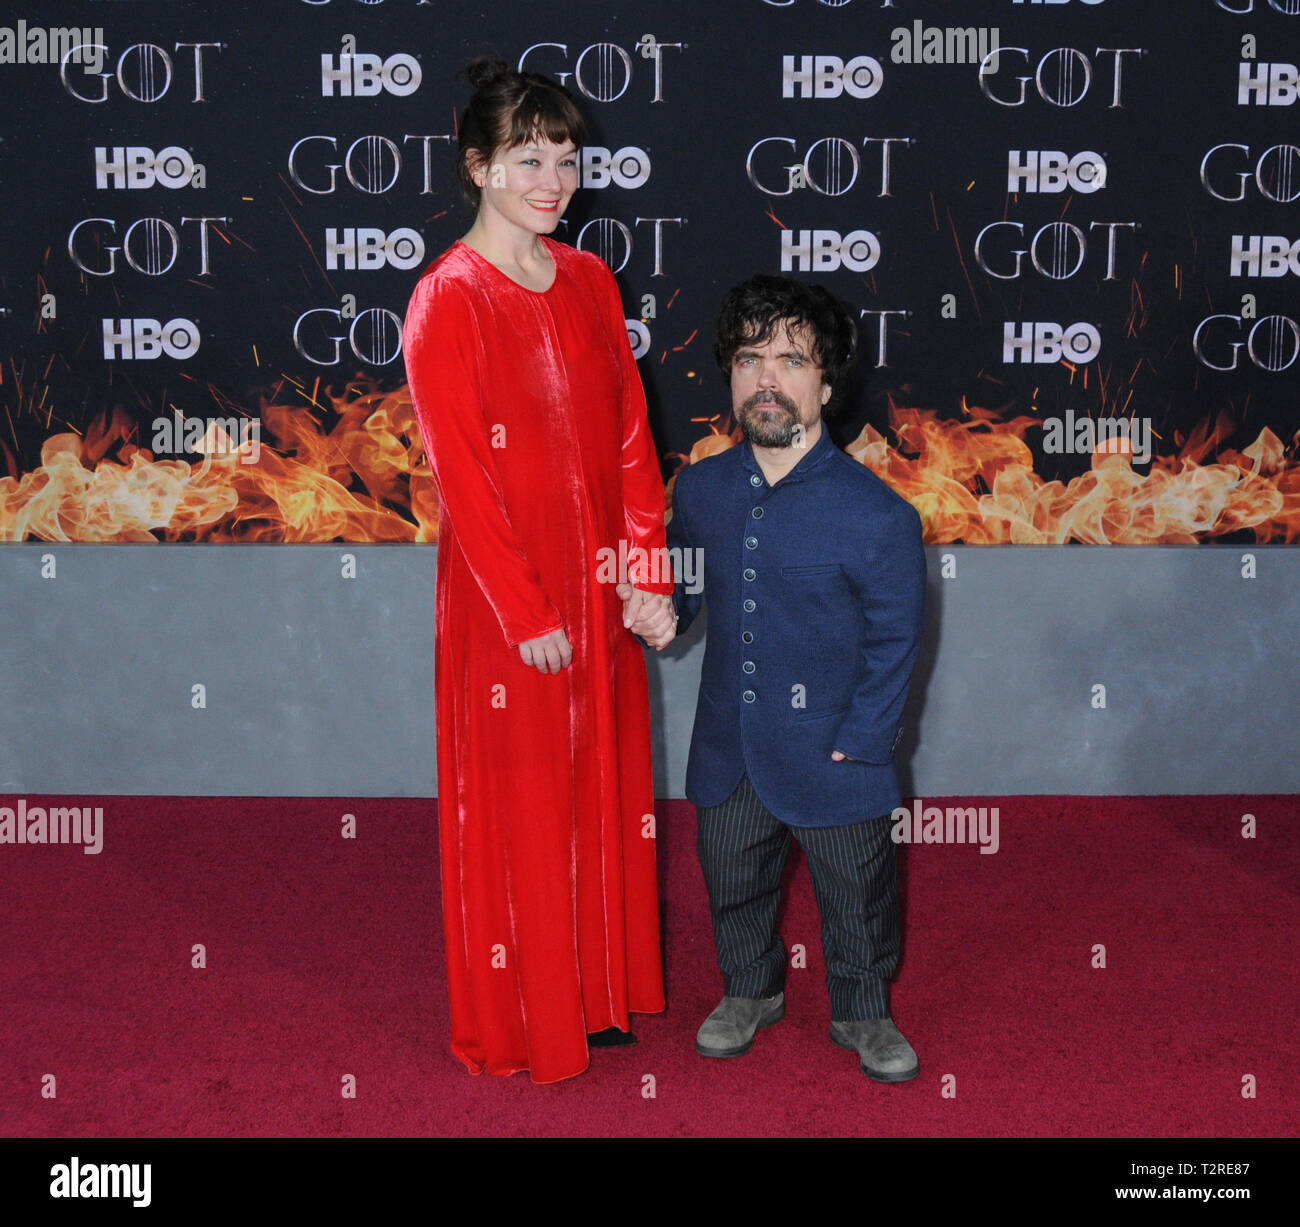 March 27, 2019 - New York, New York, U.S. - 03 April 2019 - New York, New York - Erica Schmidt and Peter Dinklage at the NYC Red Carpet Premiere for final season of HBO's ''GAME OF THRONES'' at Radio City Music Hall. Photo Credit: LJ Fotos/AdMedia (Credit Image: © Ylmj/AdMedia via ZUMA Wire) Stock Photo